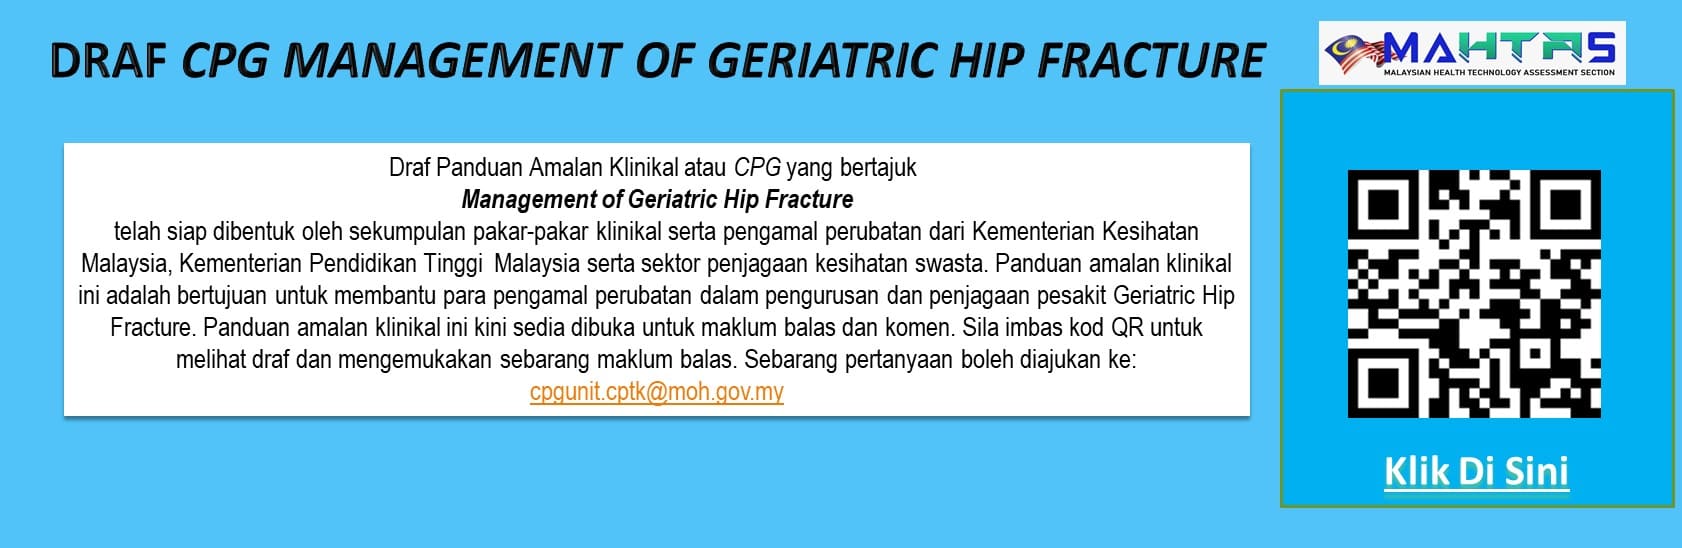 CPG Management of Geriatric Hip Fracture (GHF)